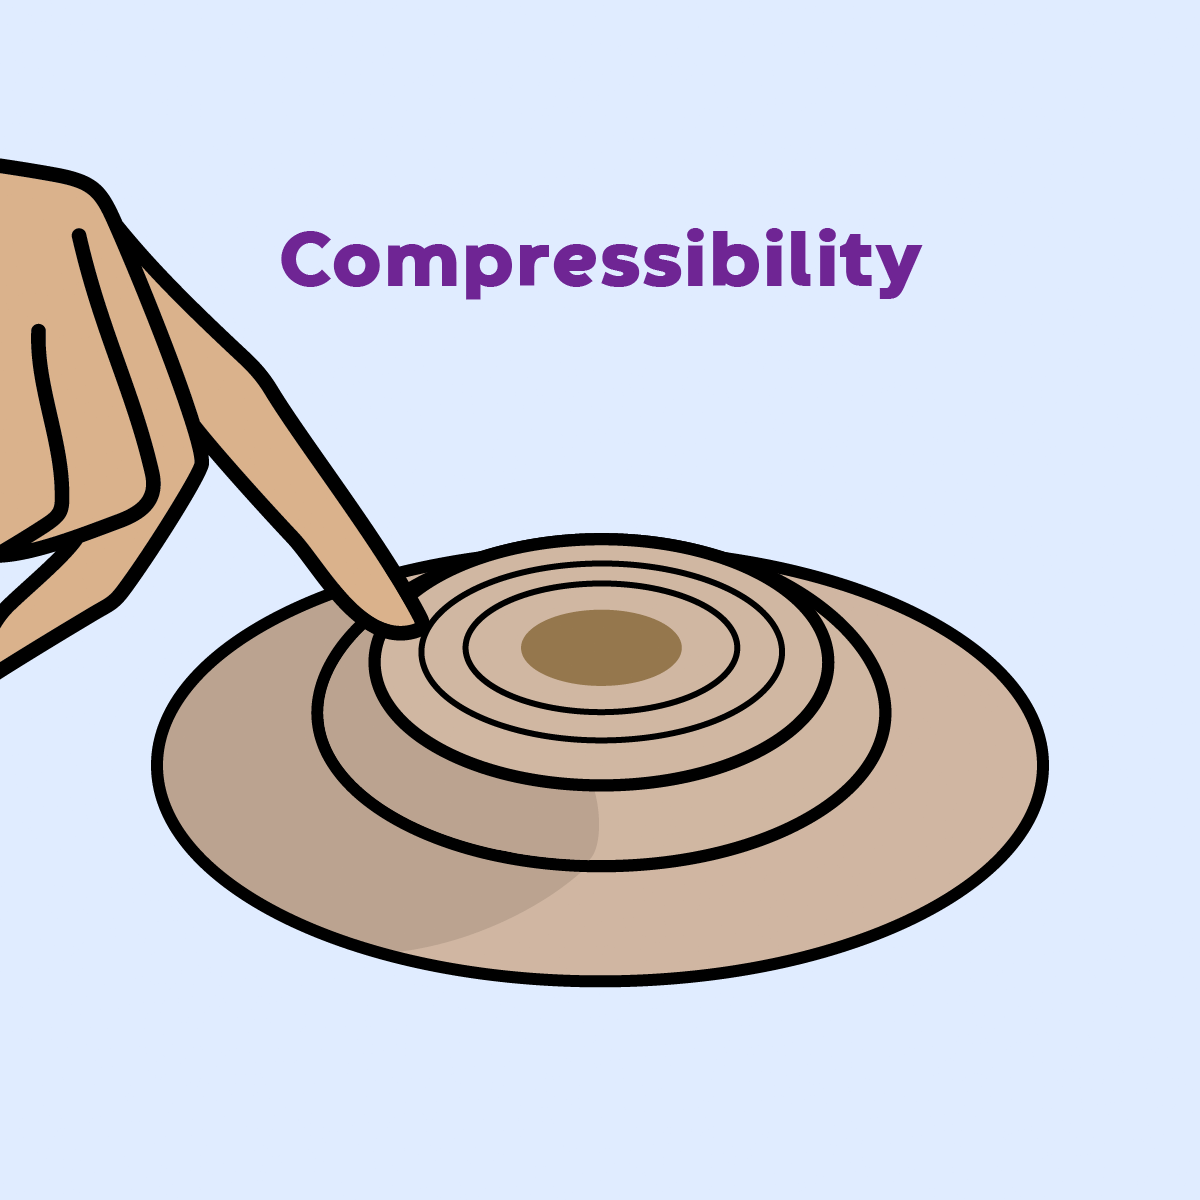 An animated GIF showing the compressibility of a convex dome, by compressing the center of the convex barrier.